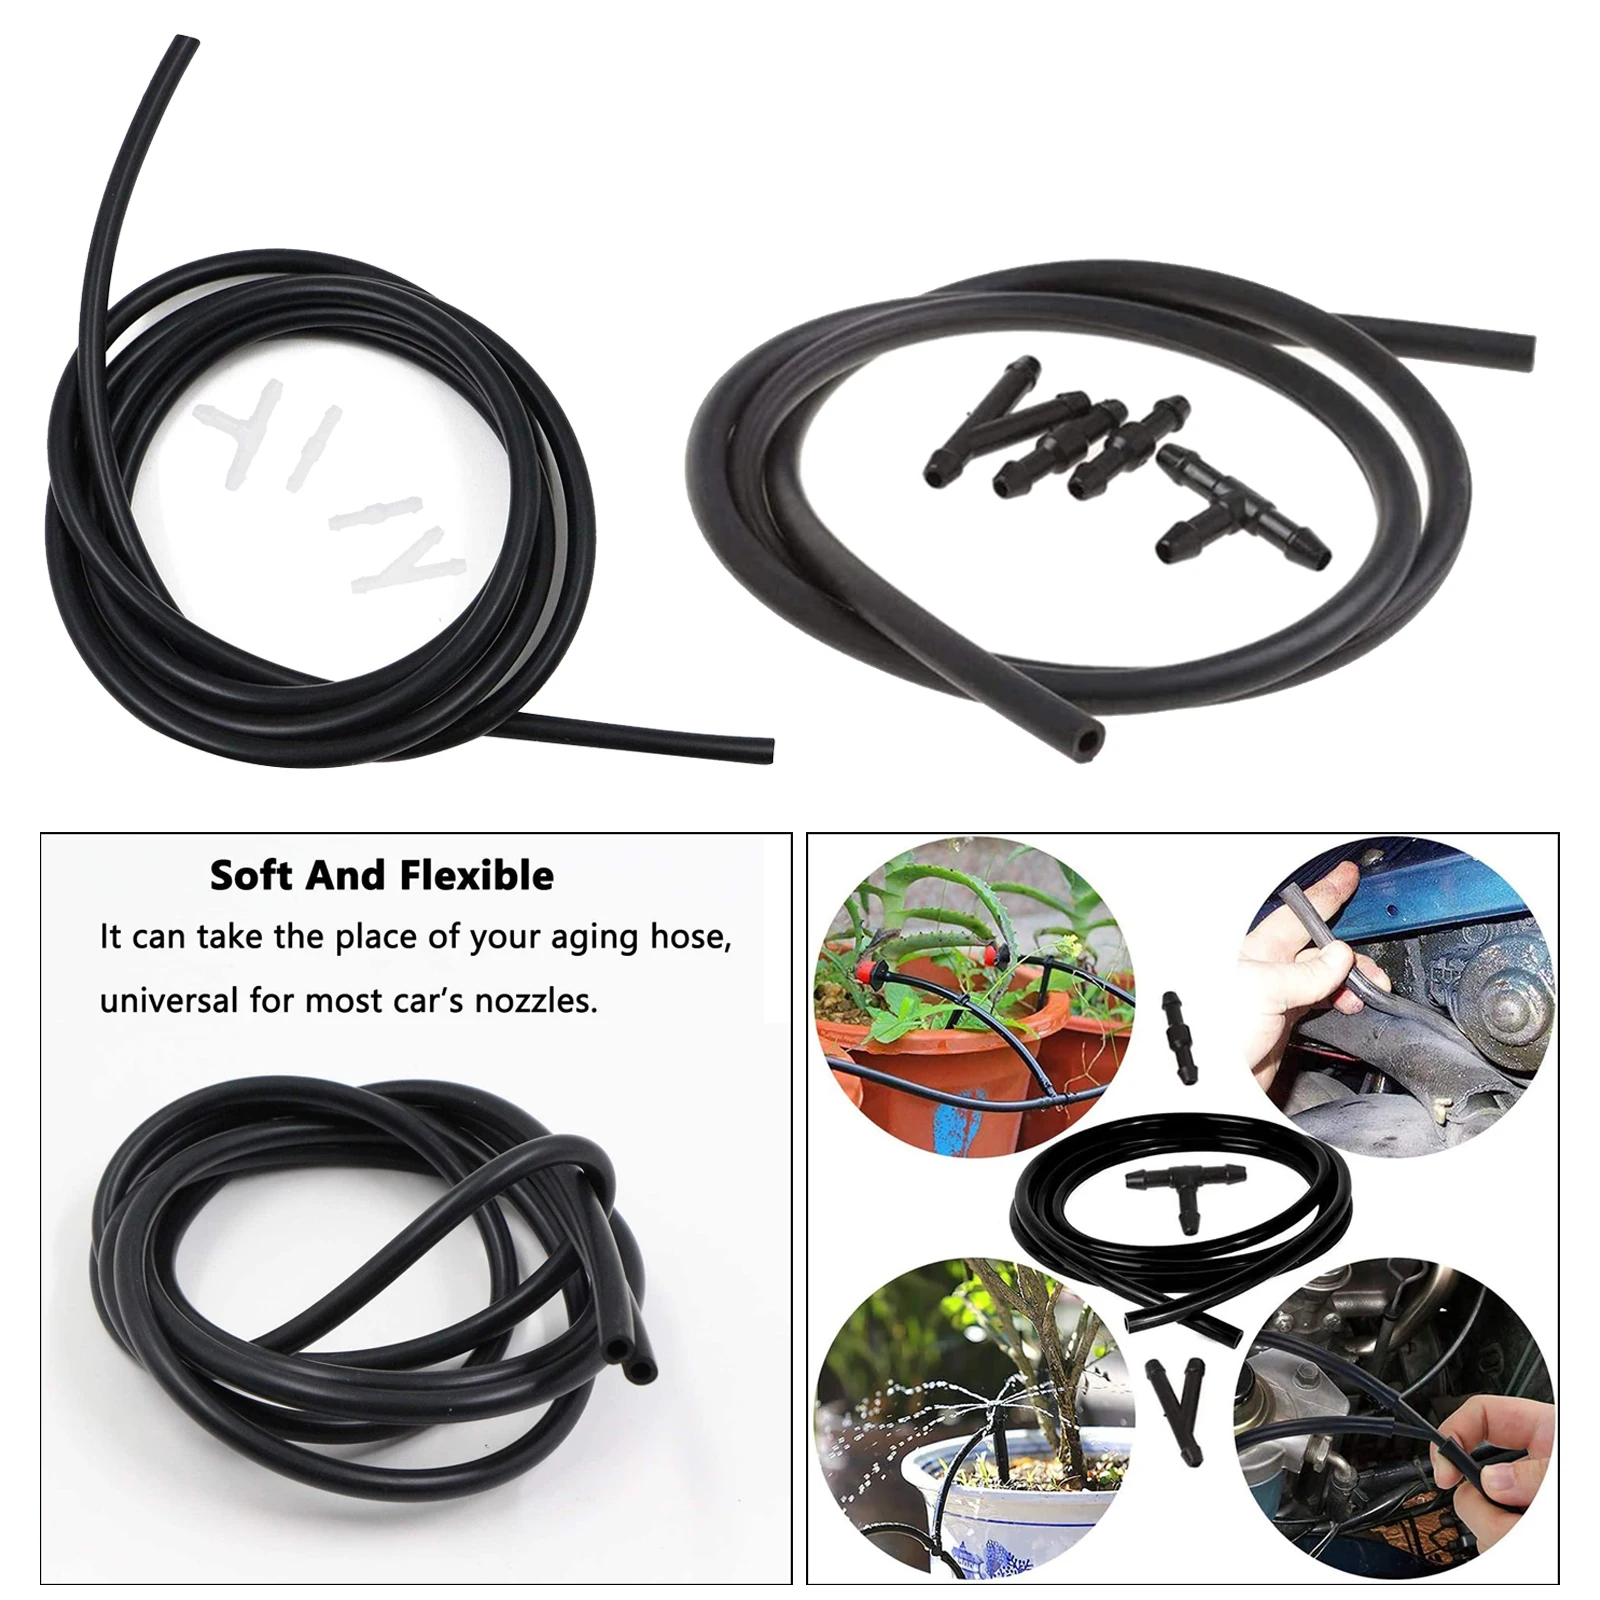 Windshield Washer Hose Kit, Universal Washer Fluid Hose with Hose Connector (2 Meters Length)